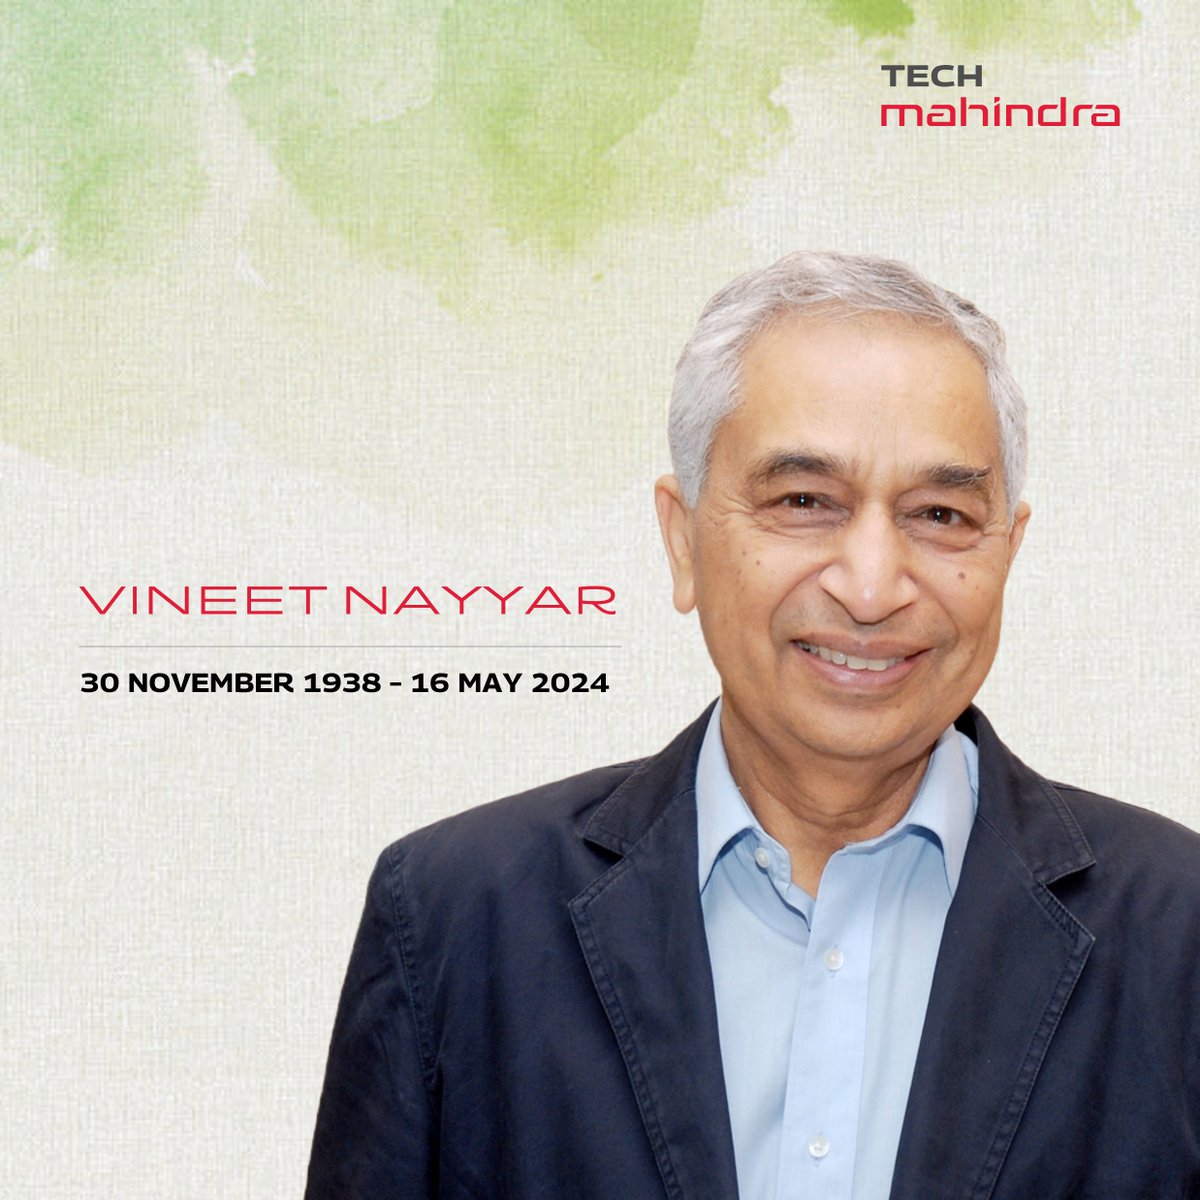 It is with immense sadness that we mourn the passing of a titan in the @MahindraRise family, Vineet Nayyar, former Vice-Chairman of Tech Mahindra, renowned for his statesmanship, sharp business acumen, and dedication to society. Our thoughts and prayers are with his family